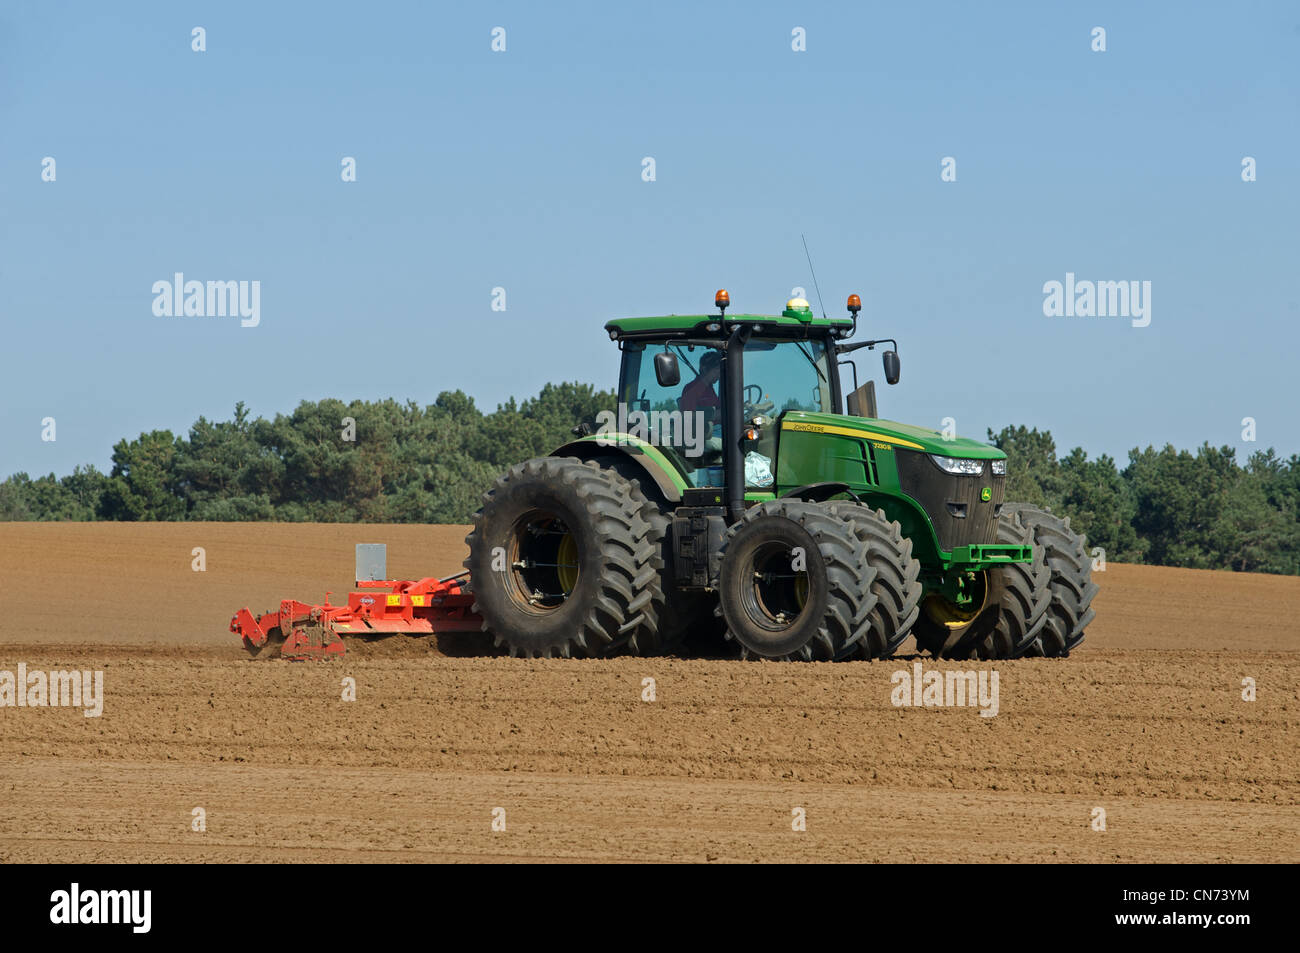 Tractor cultivating field Bawdsey Suffolk UK Stock Photo - Alamy